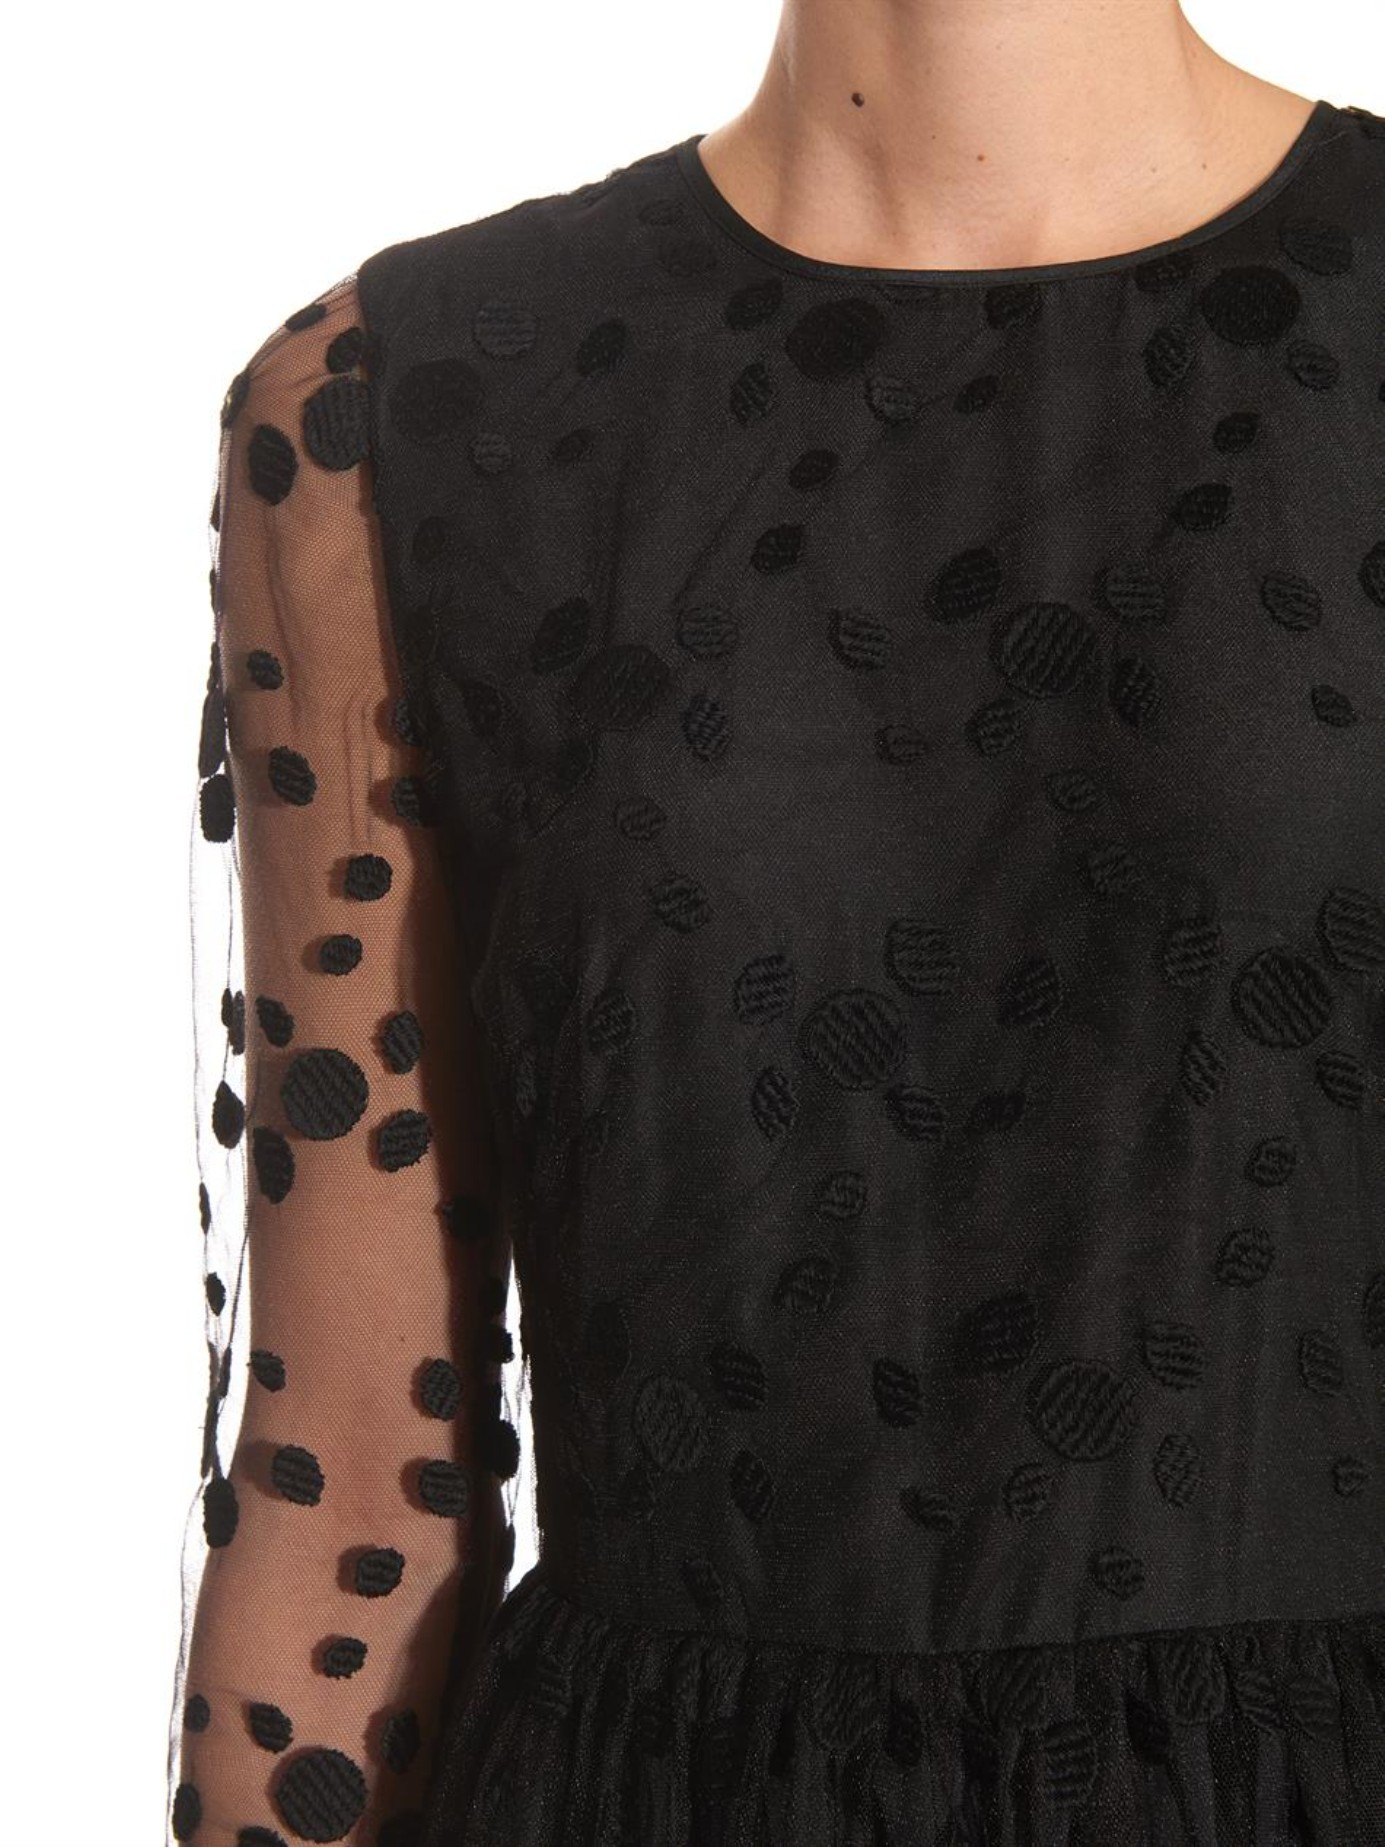 Lyst - Red Valentino Embroidered Polka Dot Tulle Dress in Black